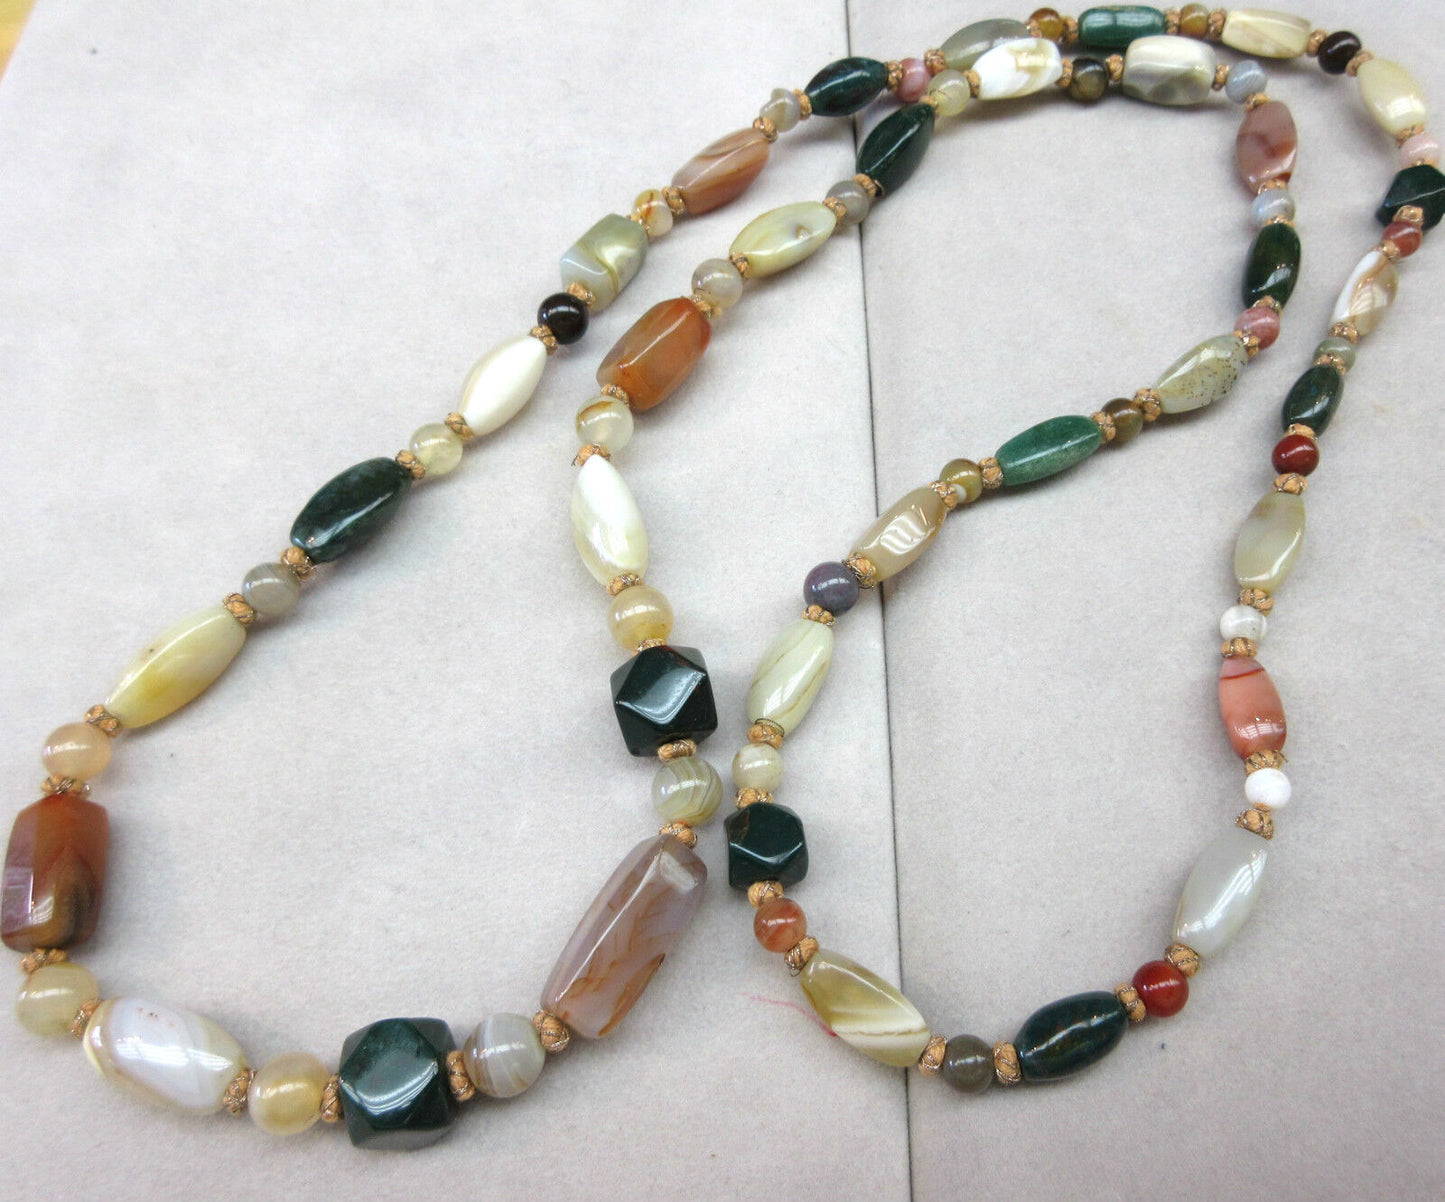 Antique Chinese export Bead Blood jade,Agate,Carnelian Necklace 42"